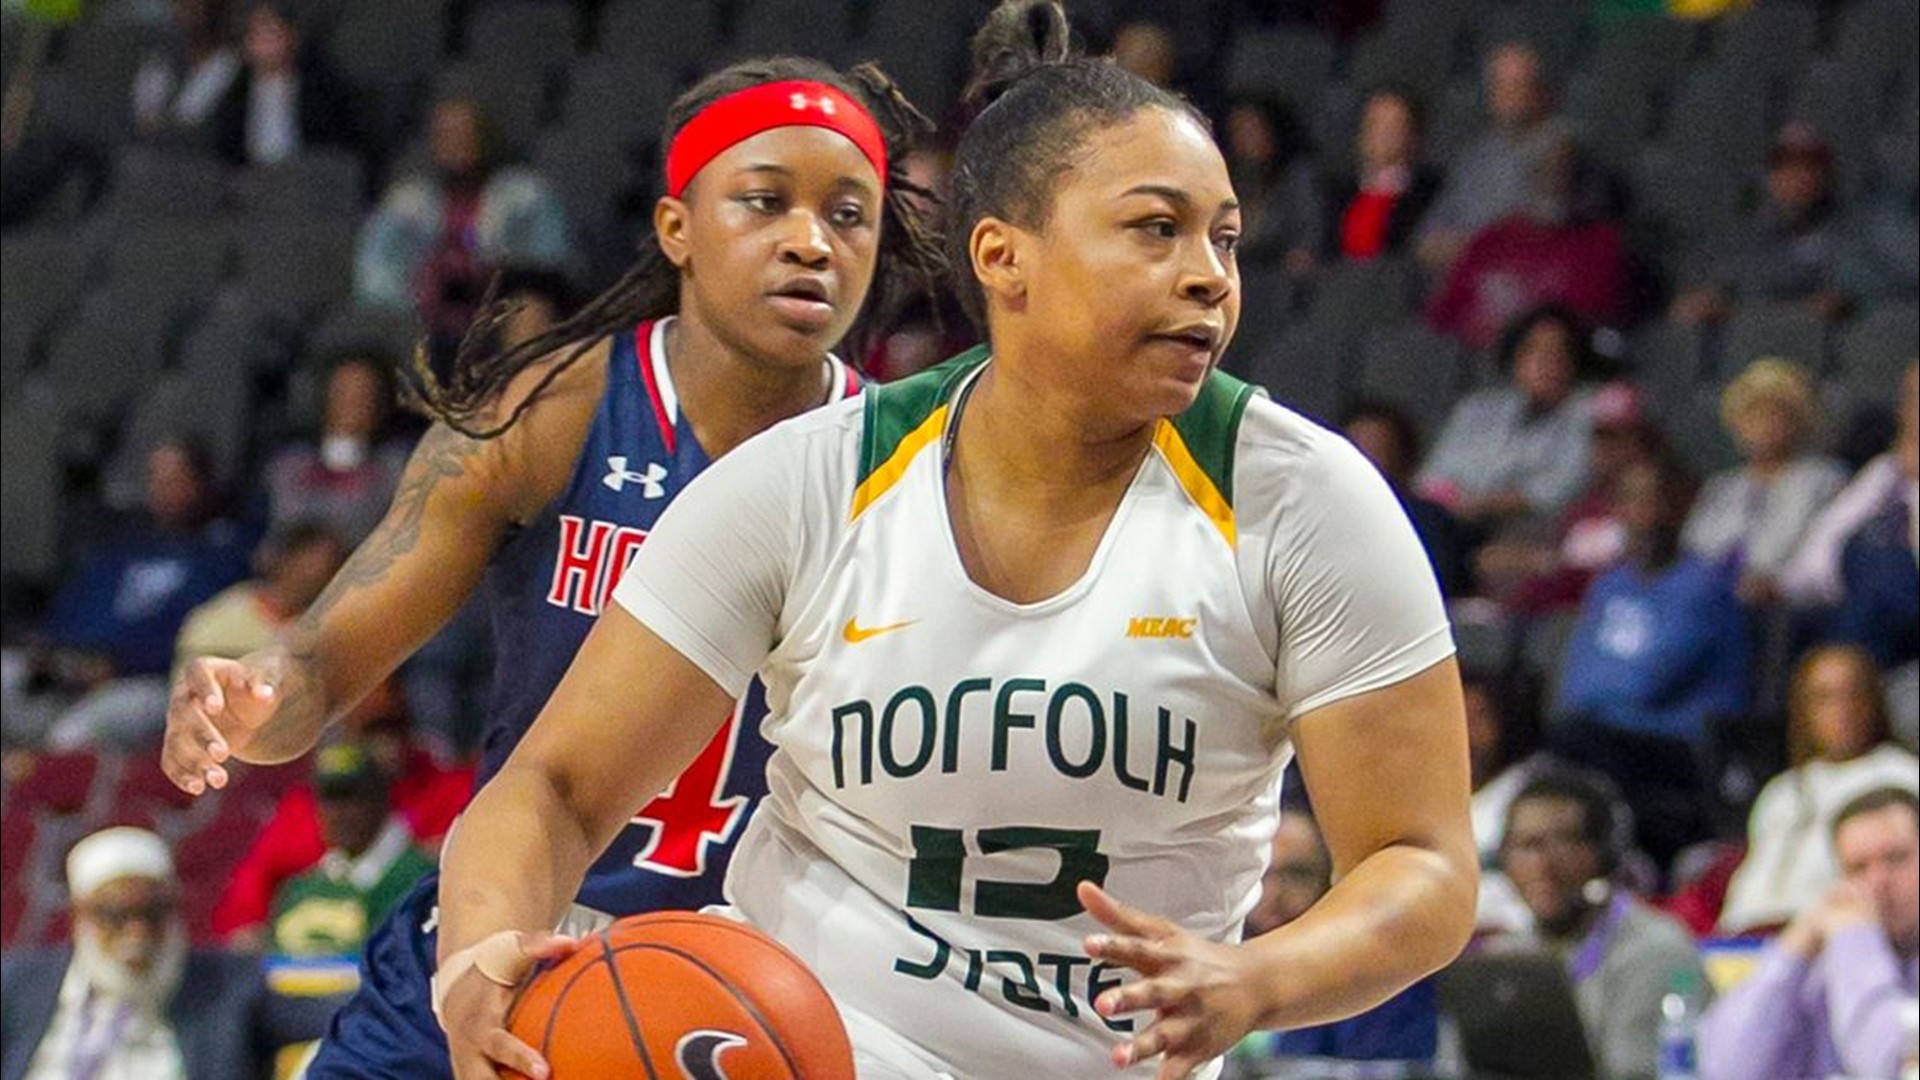 The Spartans went on a late 15-0 run to beat Howard 72-51 in the MEAC tournament.